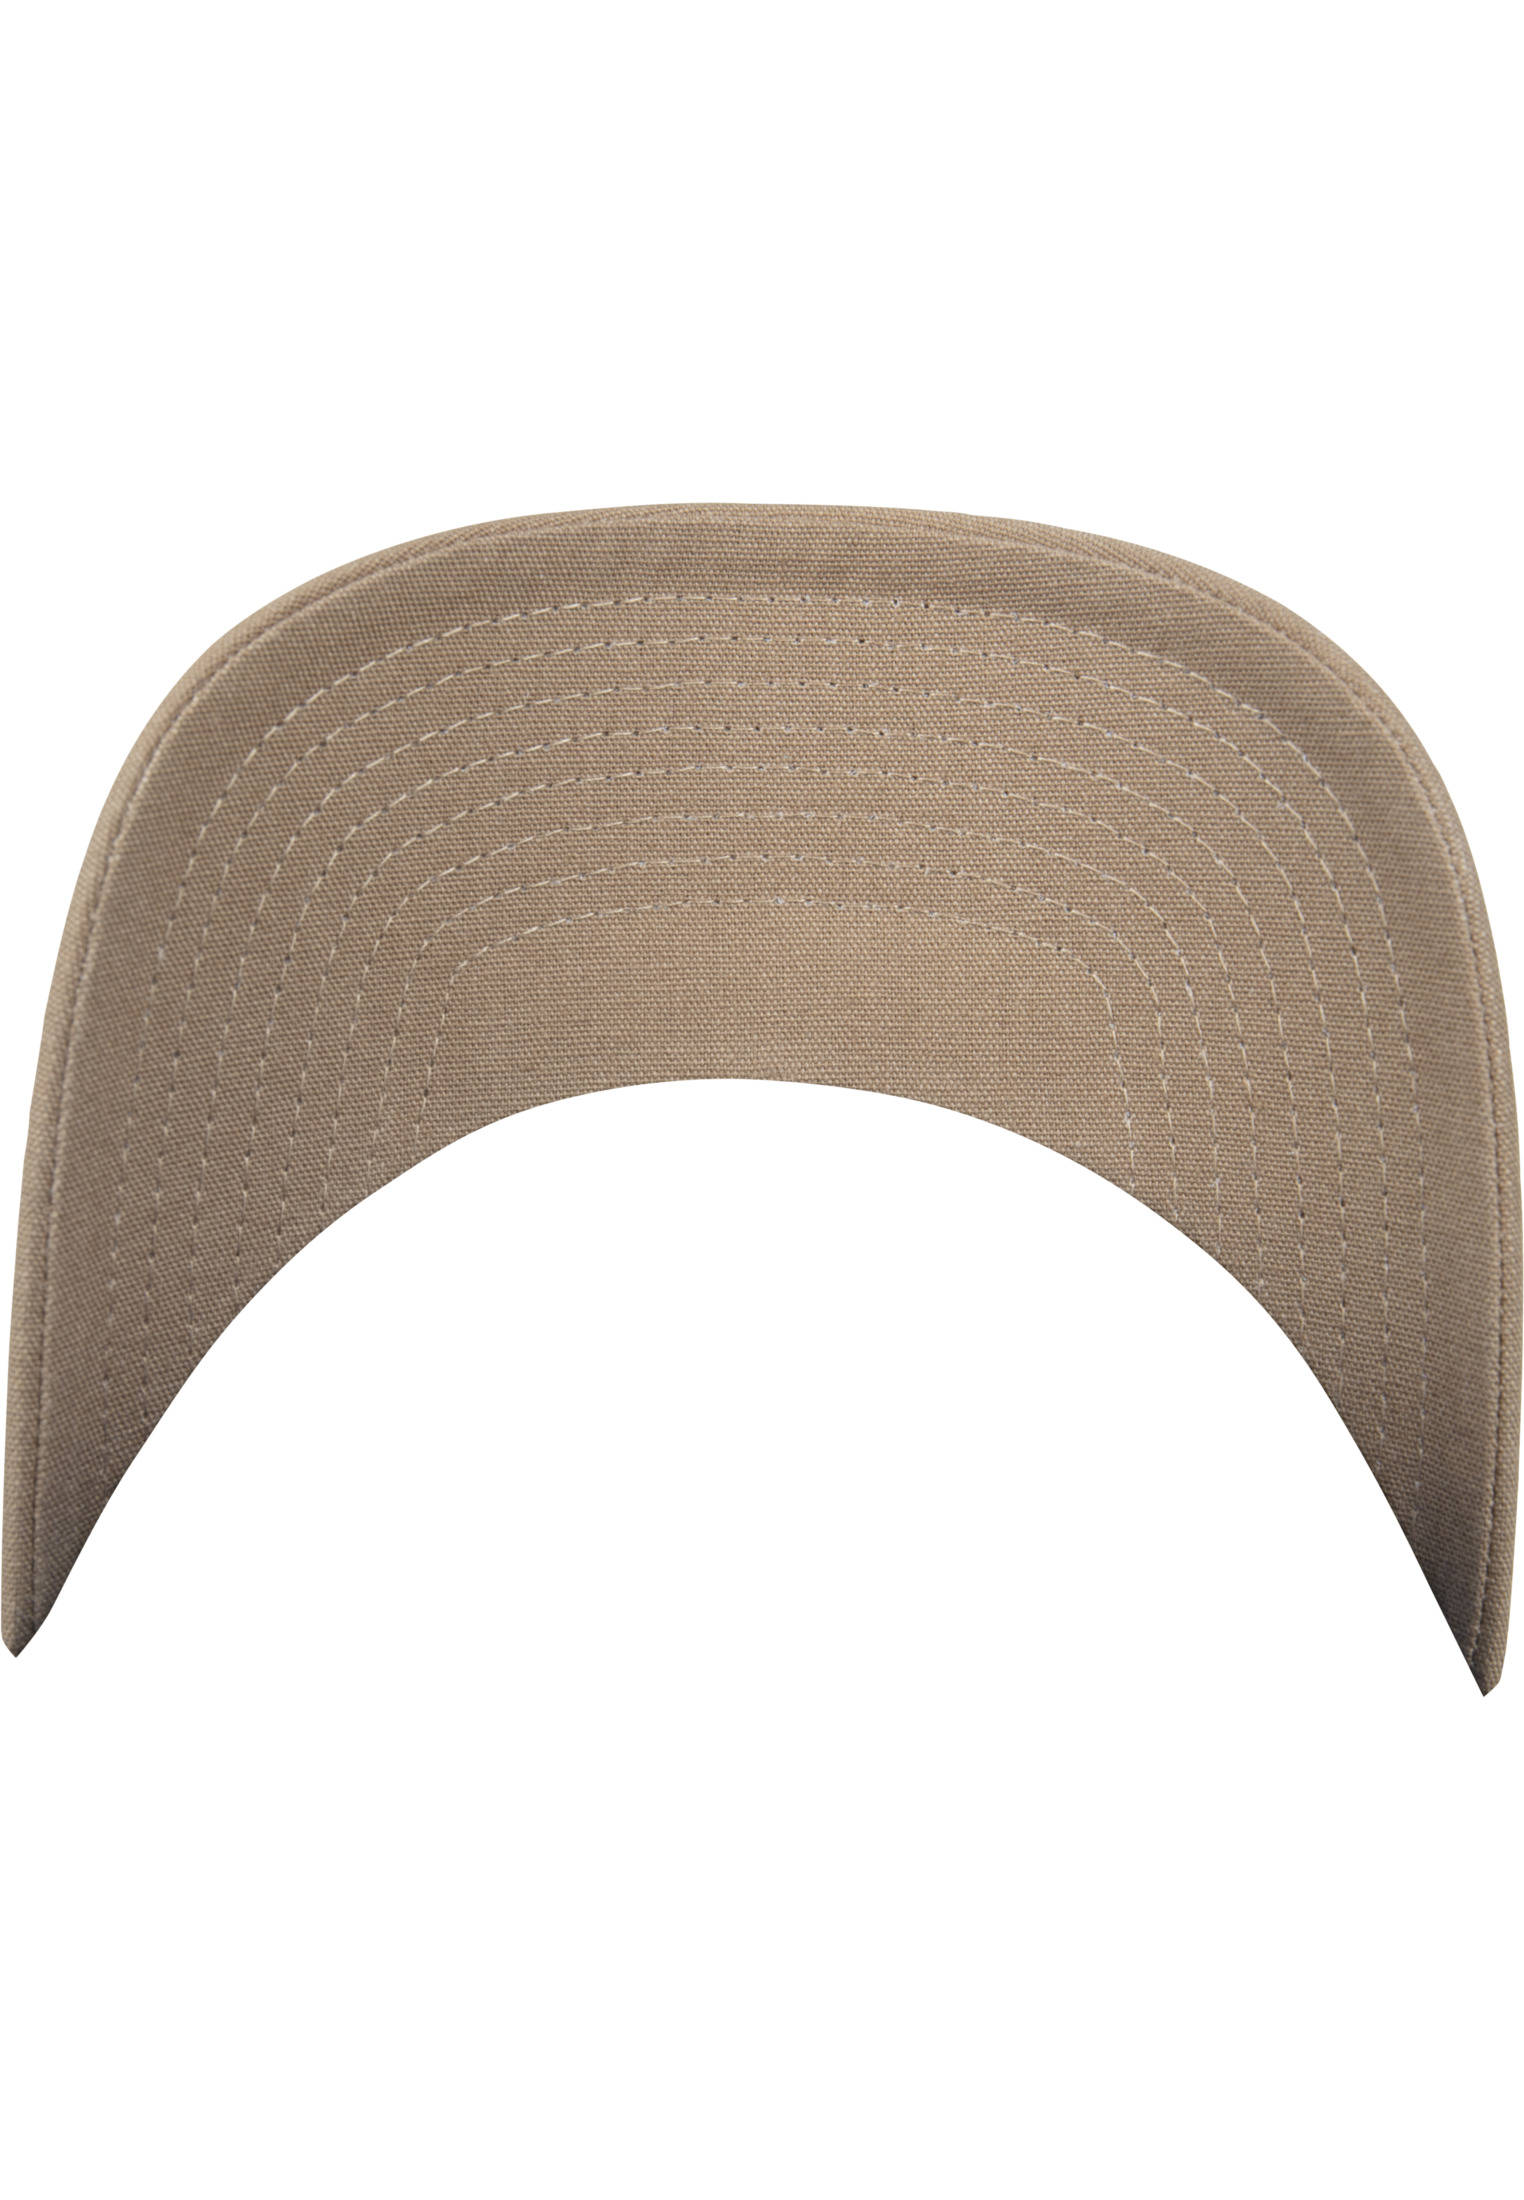 6-Panel Curved Metal Snap-7708MS